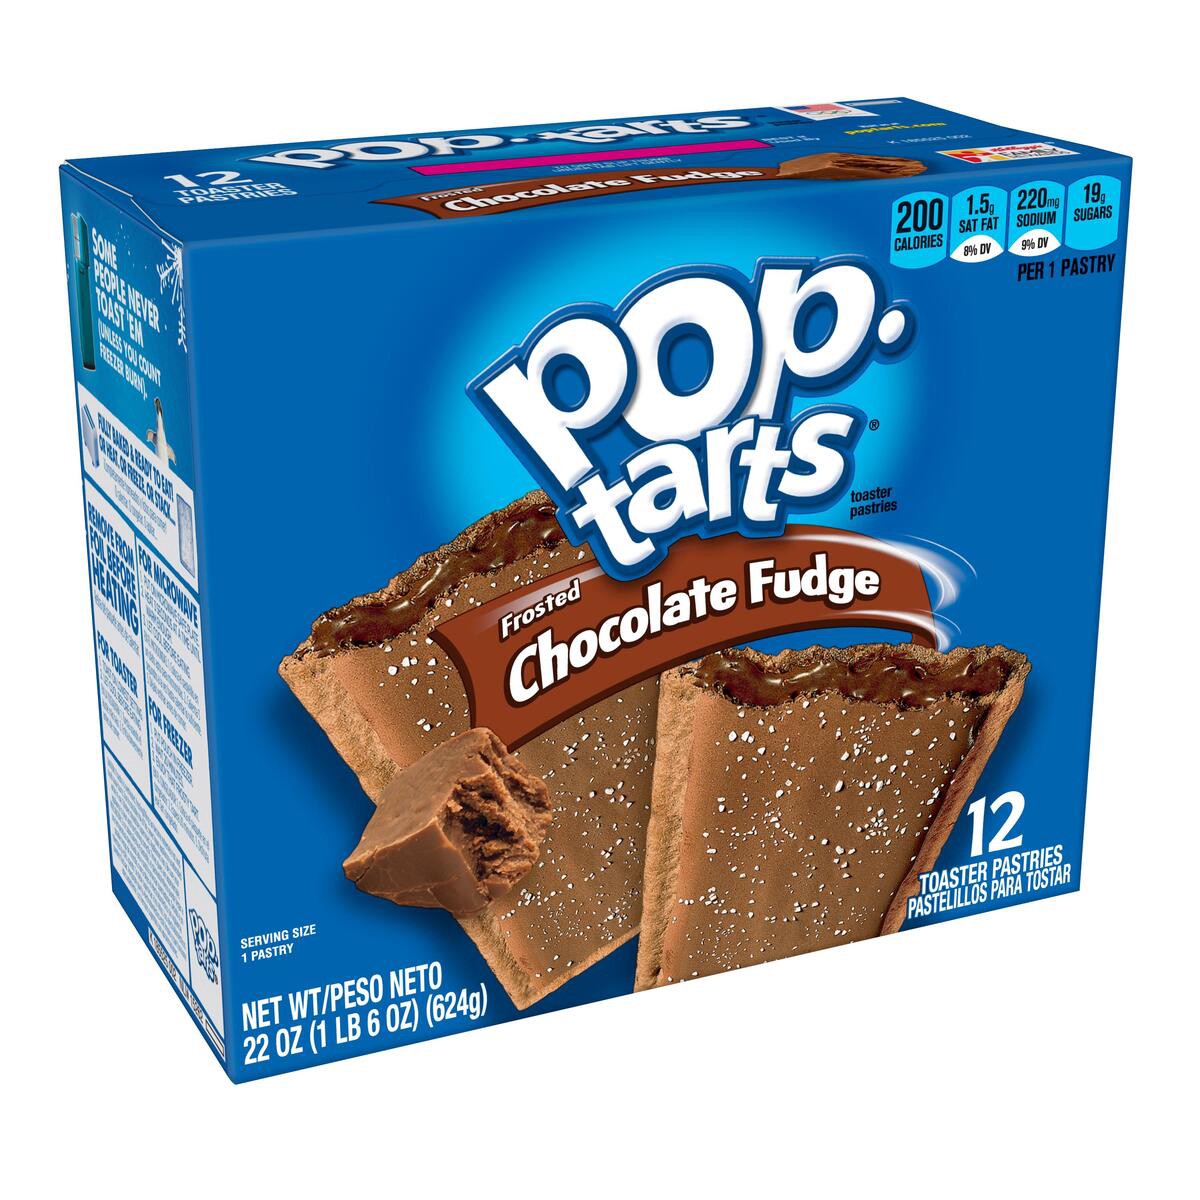 slide 1 of 10, Pop-Tarts Frosted Chocolate Fudge Pastries, 12 ct